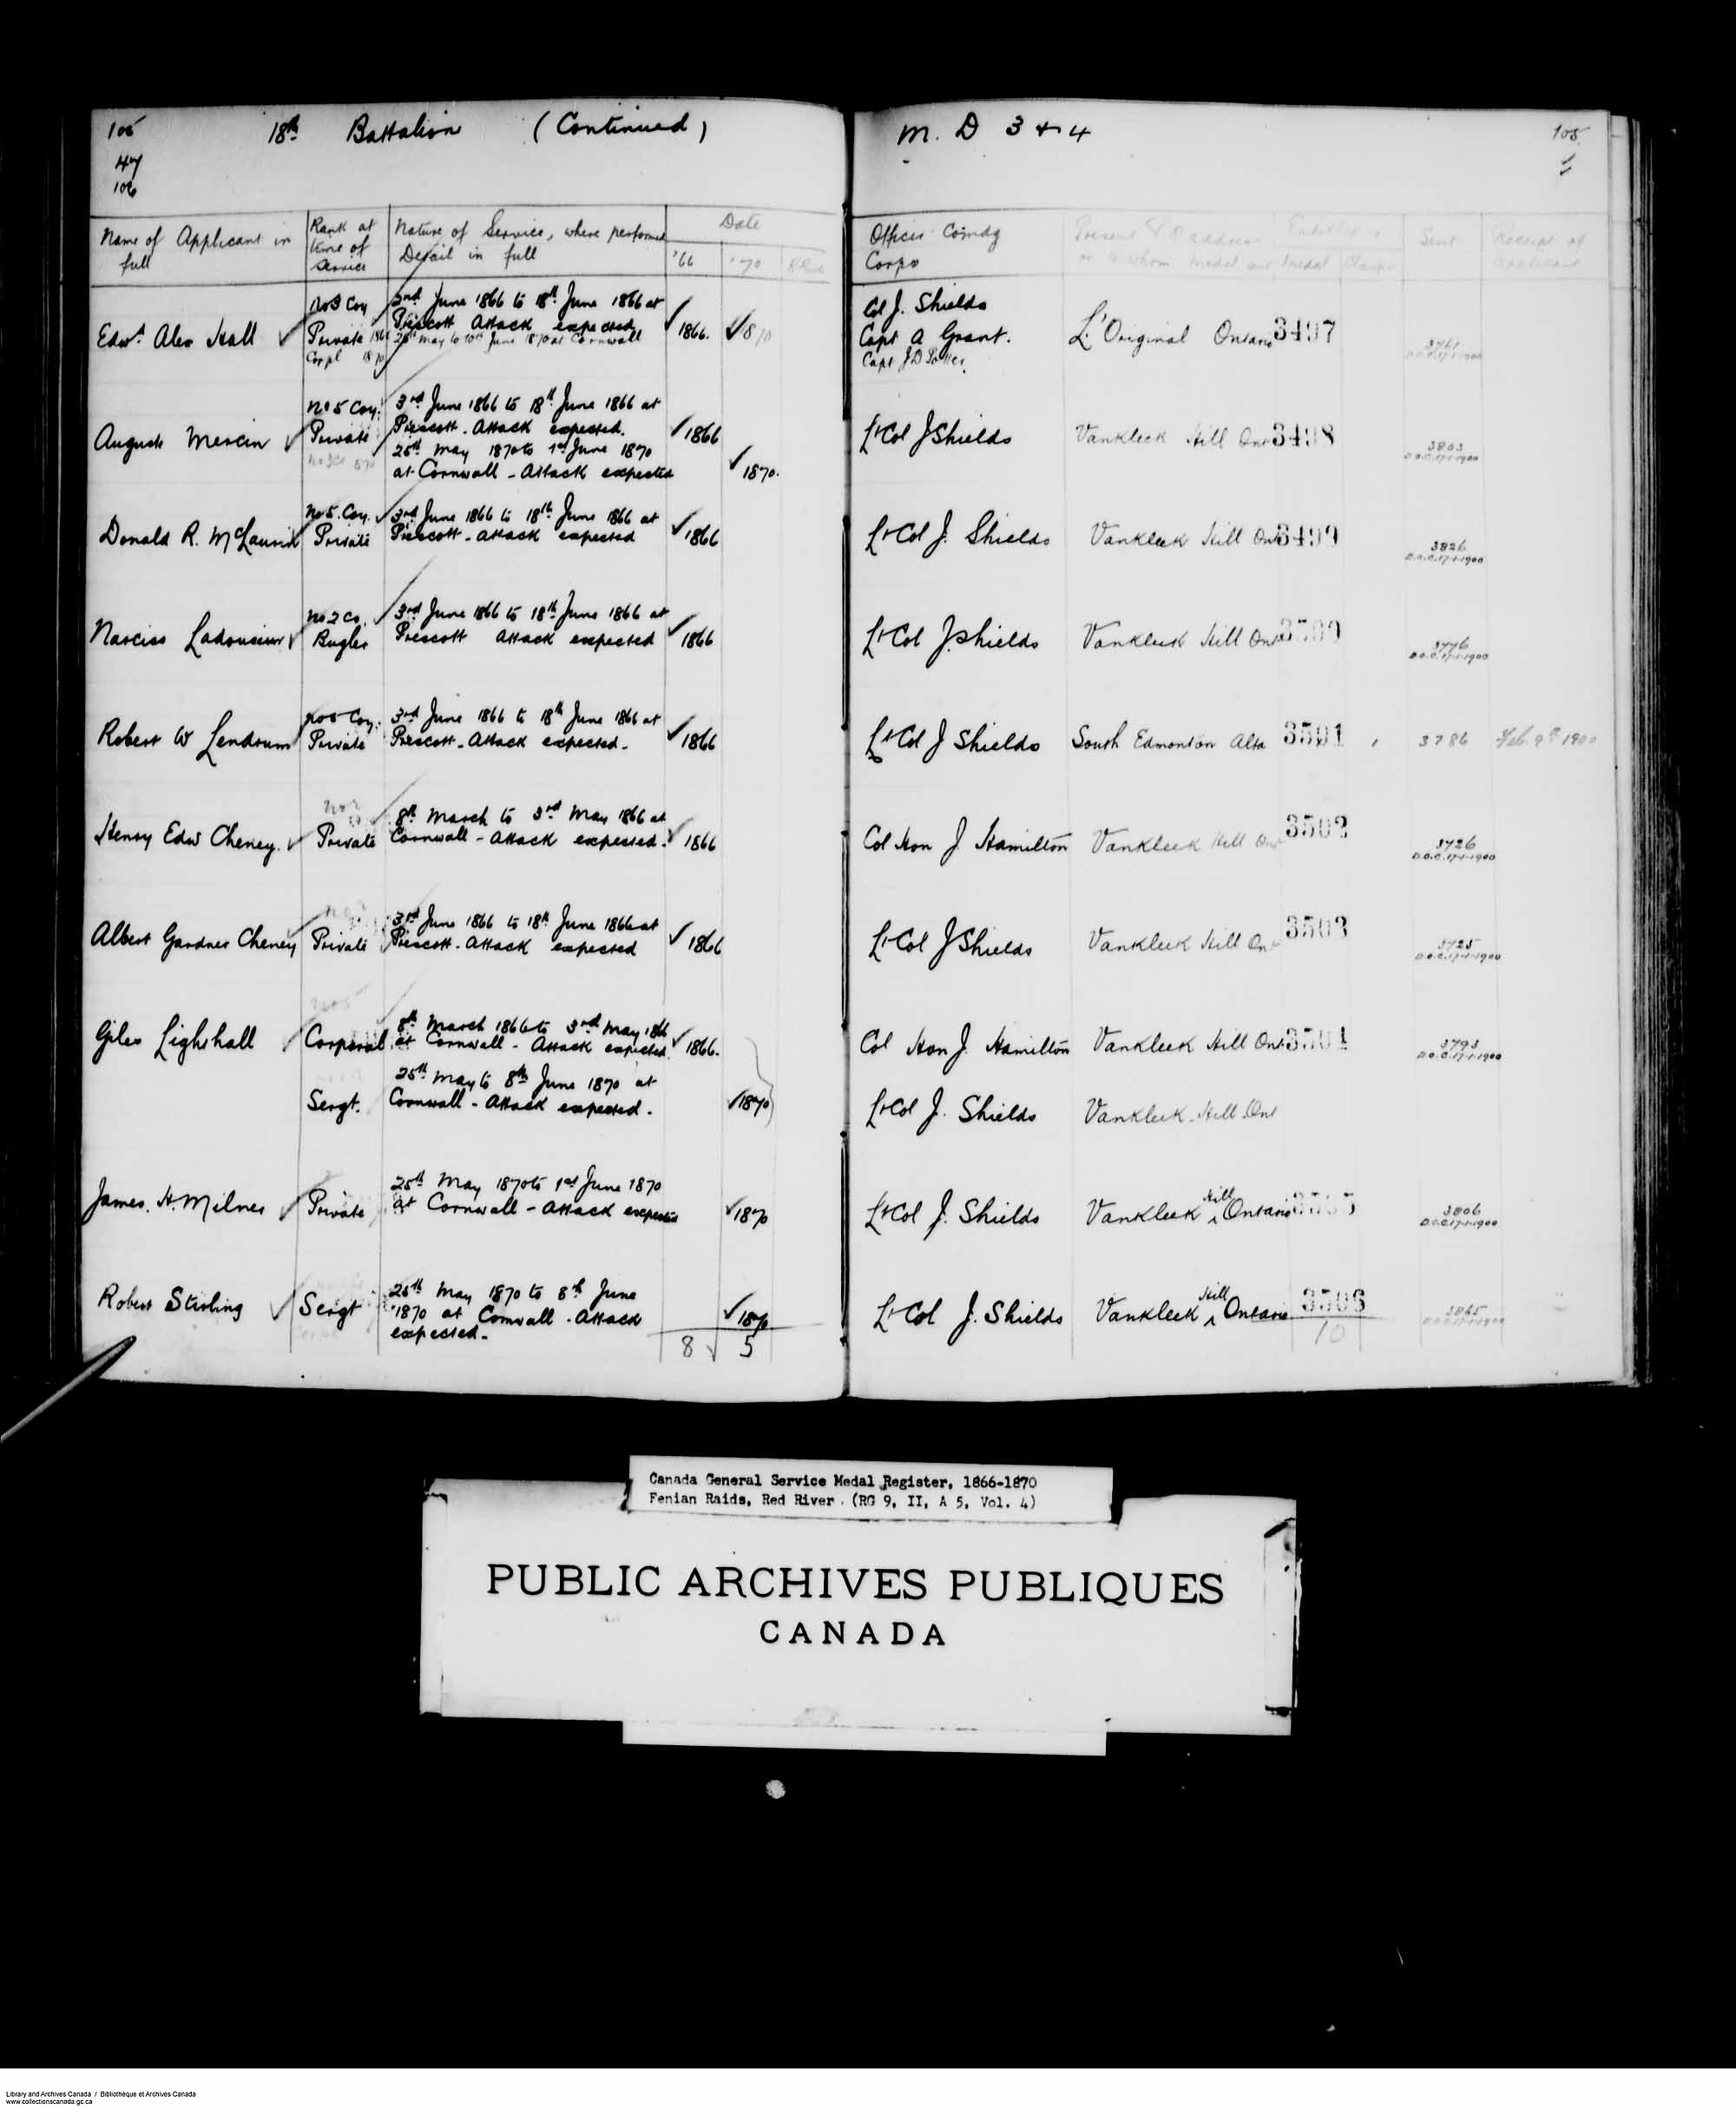 Digitized page of Medals, Honours and Awards for Image No.: e008681791